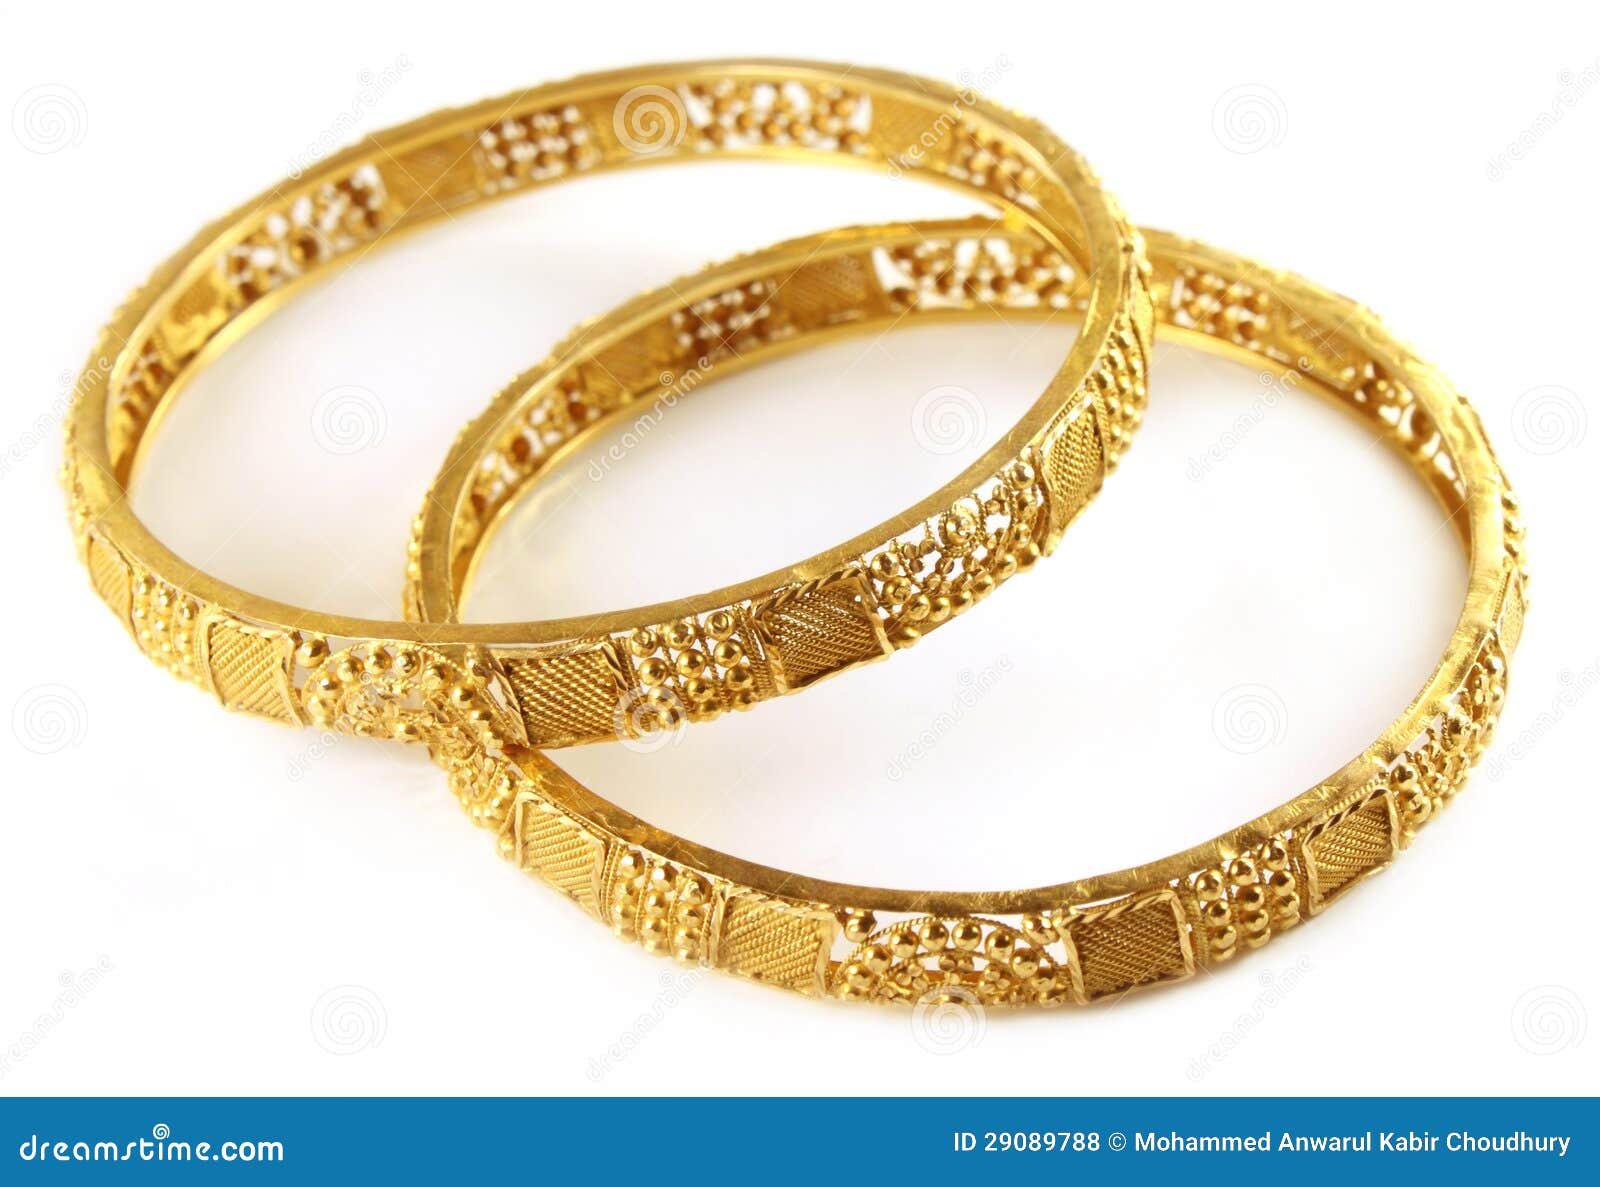 South Indian Jewellery now buy Online Bracelet - Gold